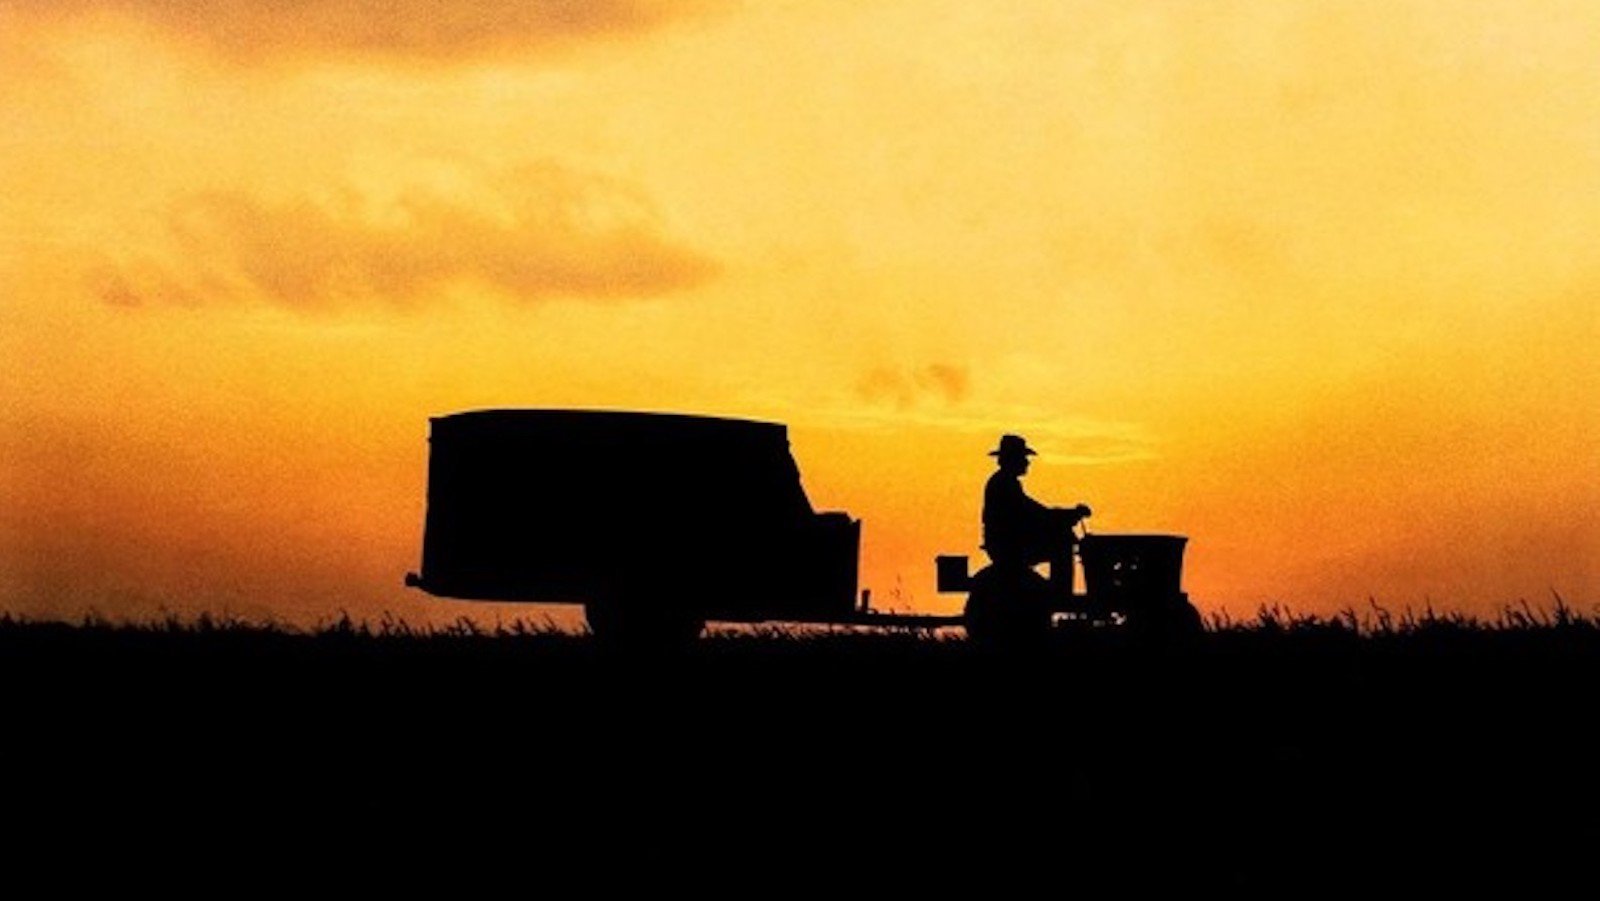 A silhouetted tractor rides down a road at twilight against on orange sky, with a human figure at the front.